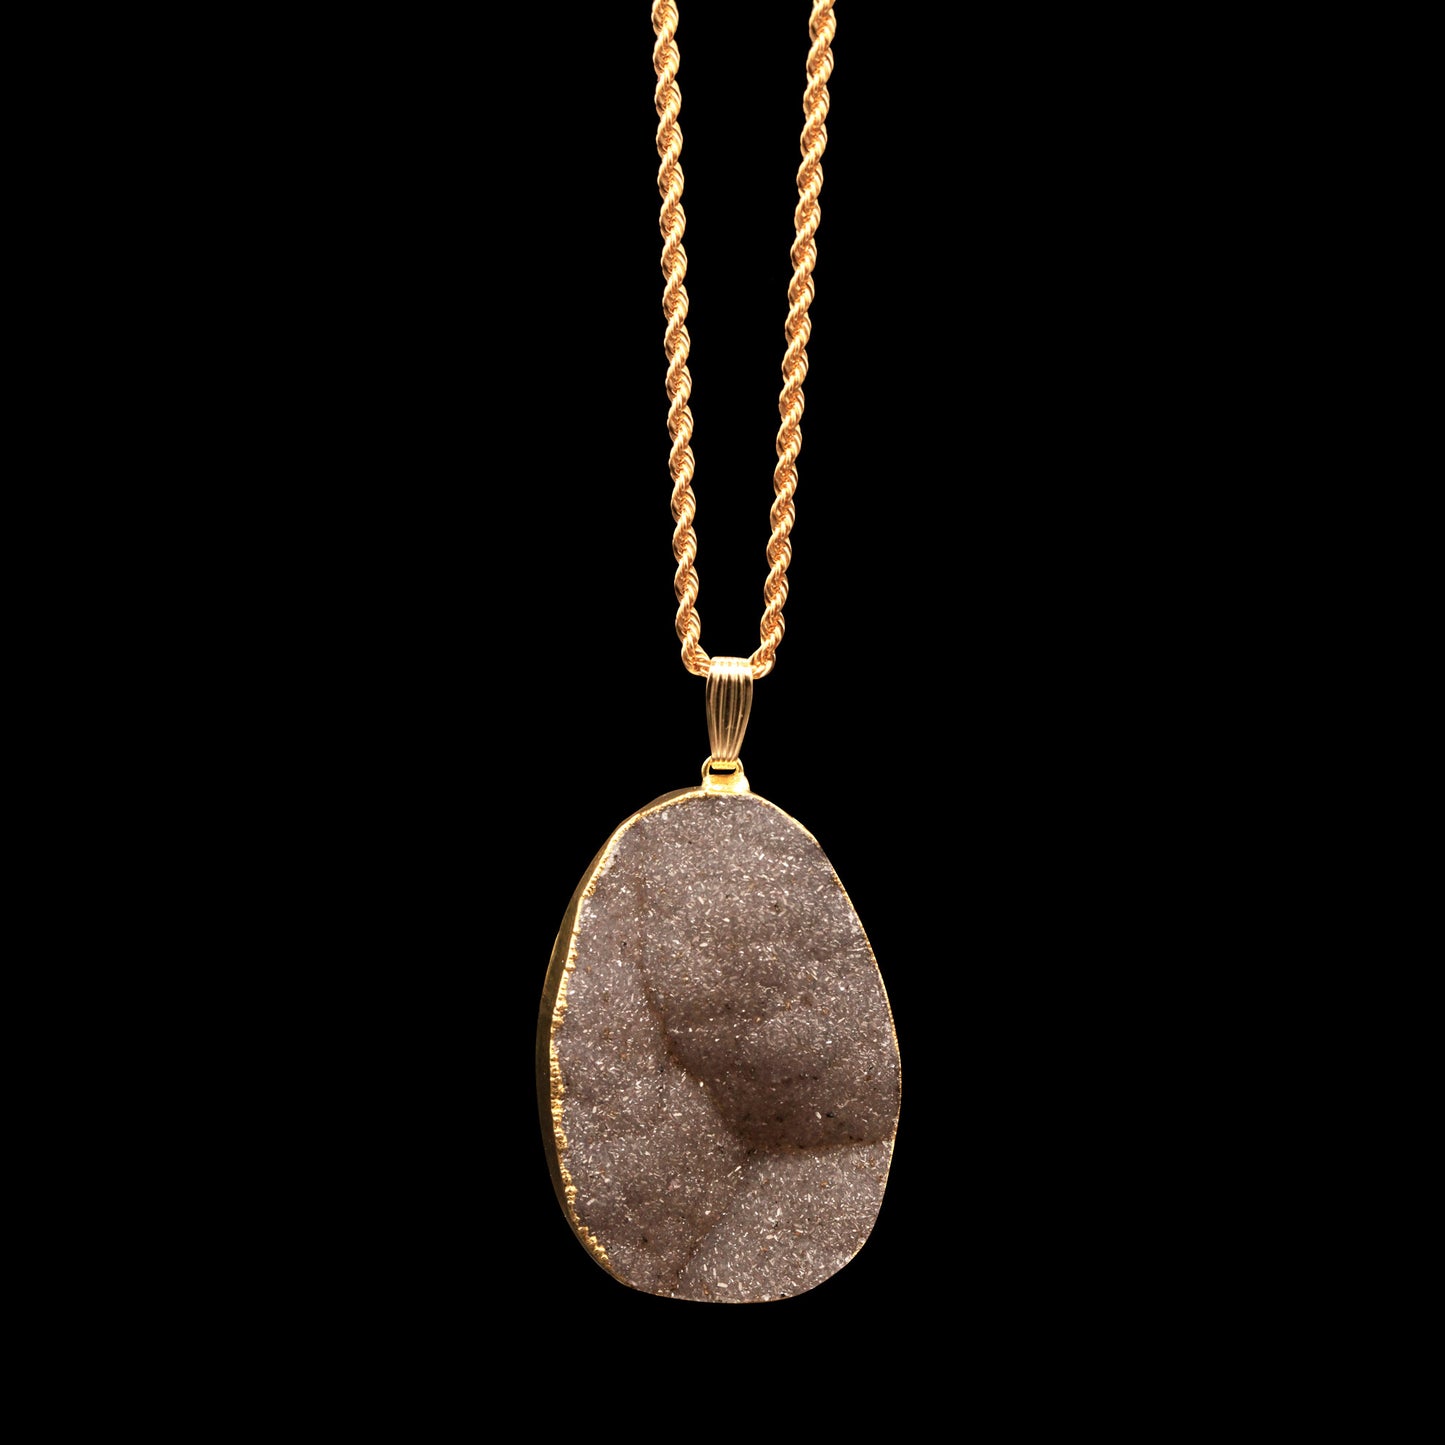 Cadet Gray Agate Druzy on Rope